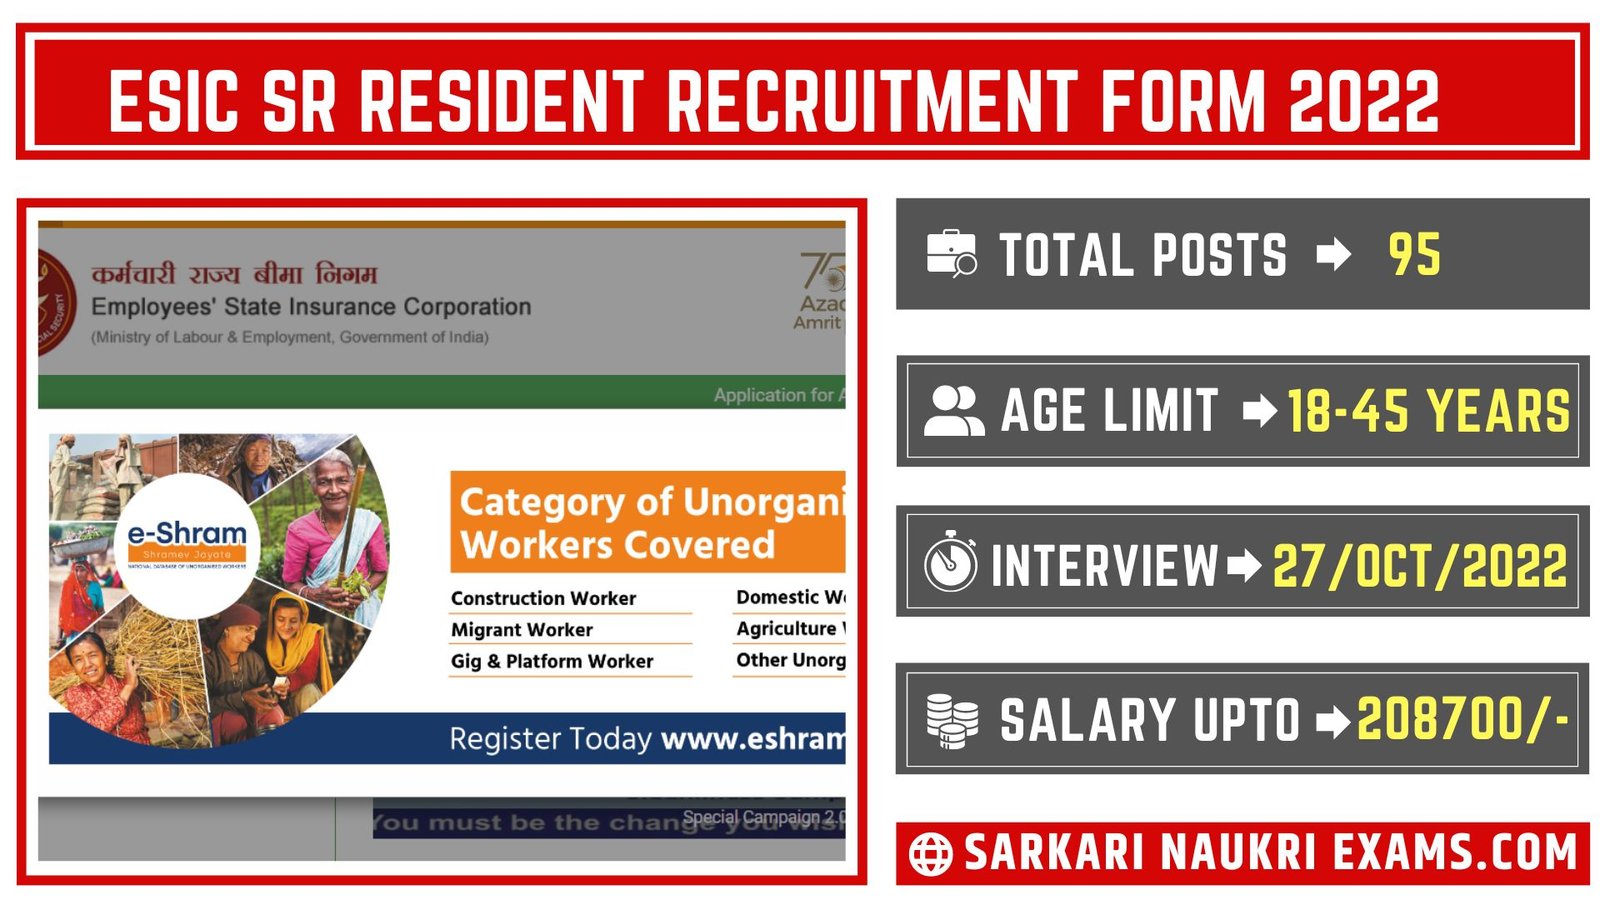 ESIC Sr Resident Recruitment Form 2022 | Salary Up To 208700/-